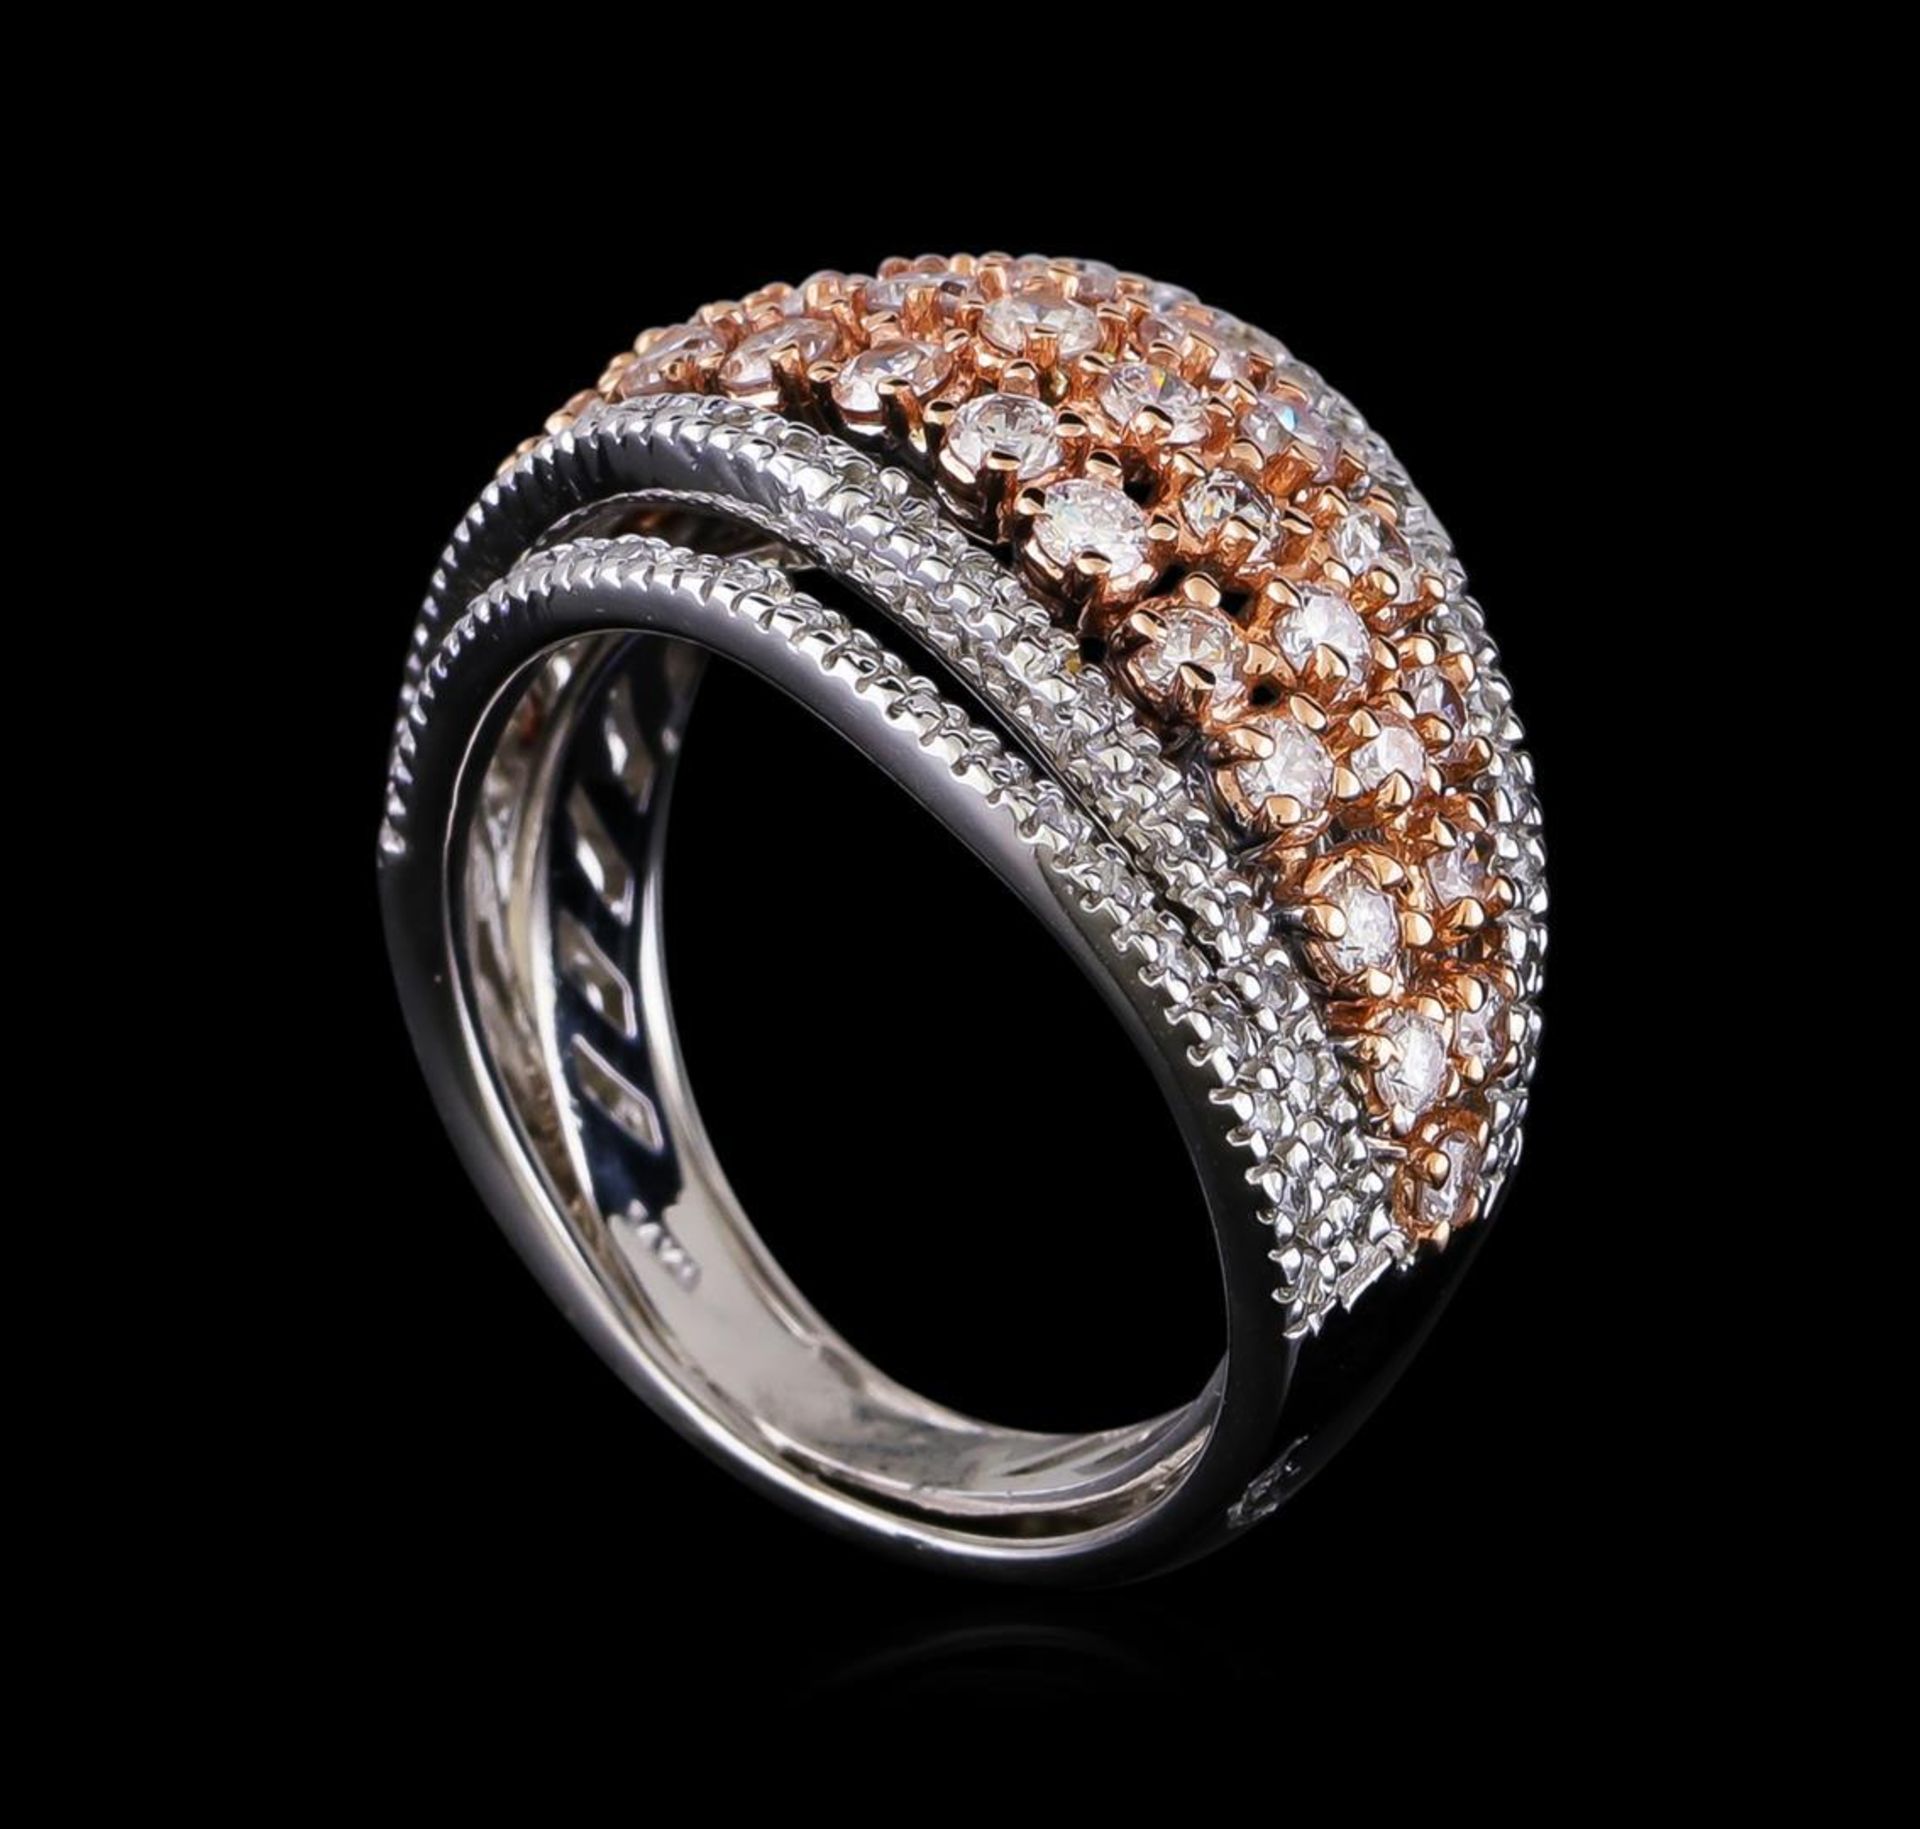 2.21 ctw Diamond Ring - 14KT Rose and White Gold - Image 4 of 5